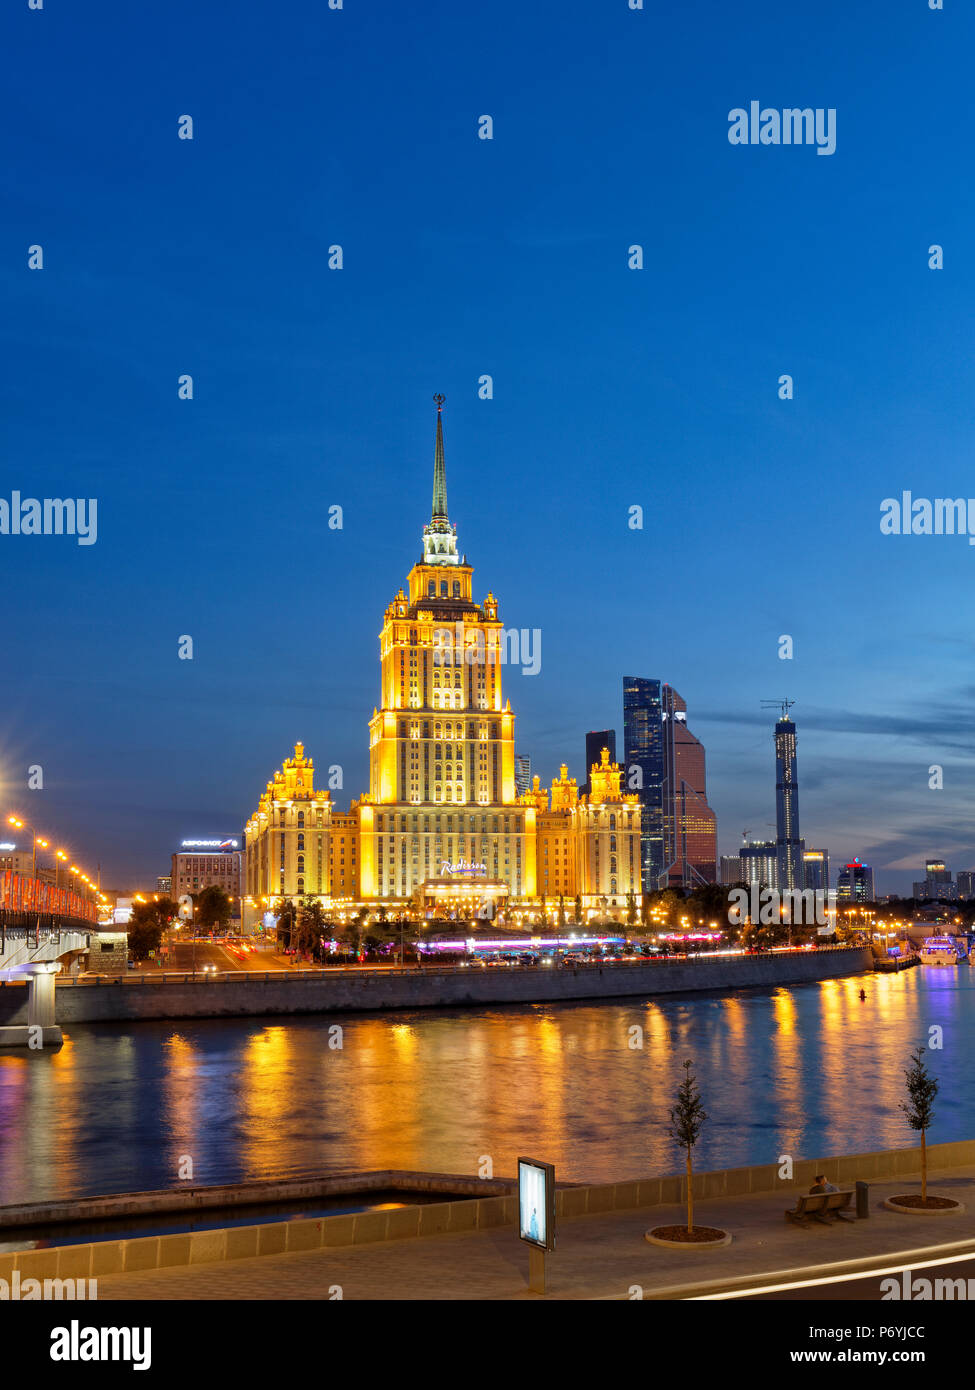 Radisson Royal Hotel Stalinist style high-rise building on Moskva River illuminated at dusk. Moscow, Russia. Stock Photo